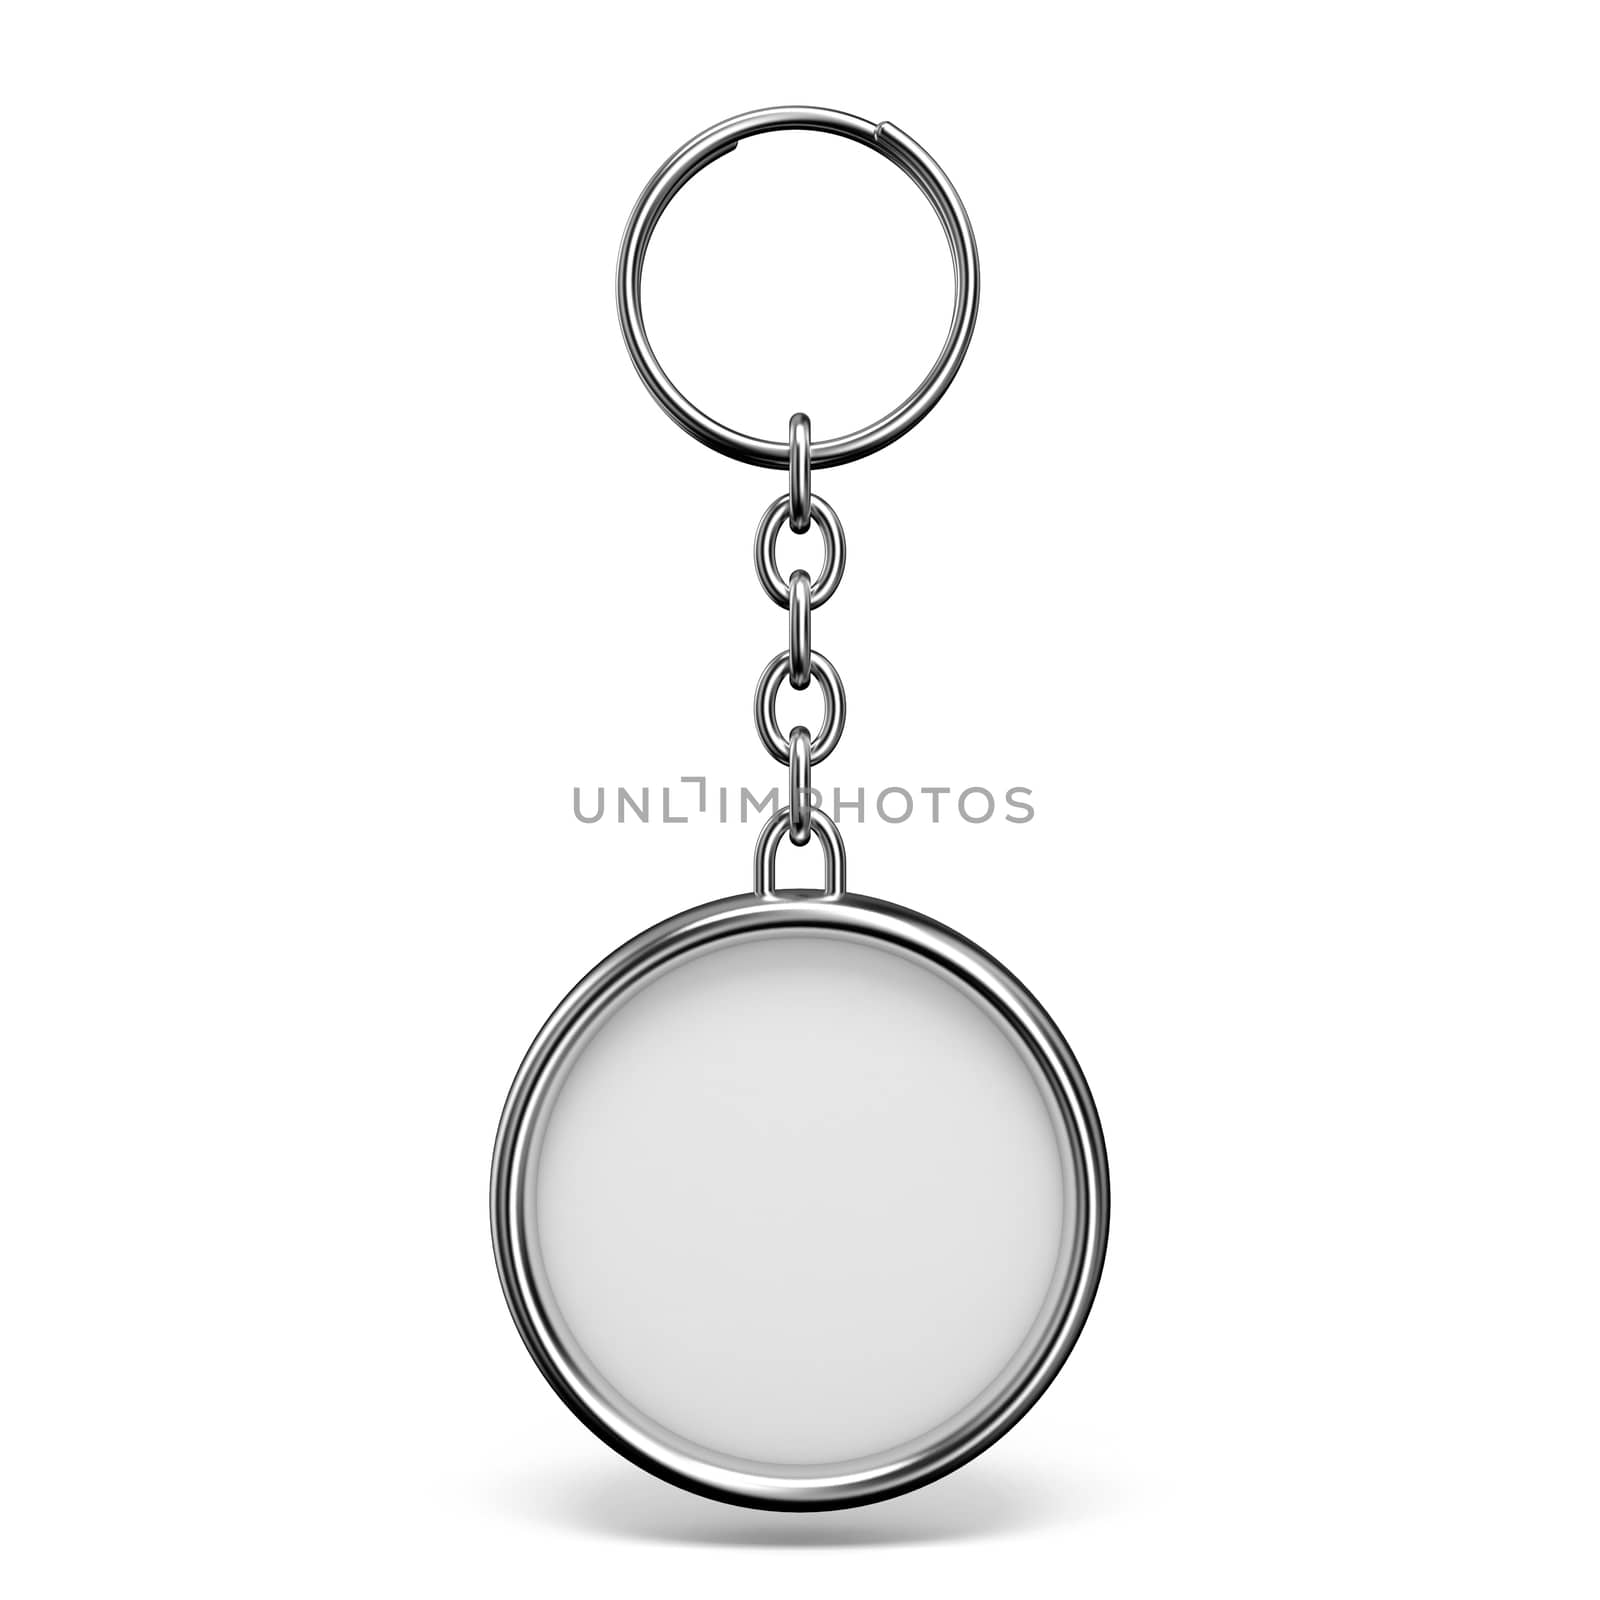 Blank metal trinket with a ring for a key circle shape 3D by djmilic